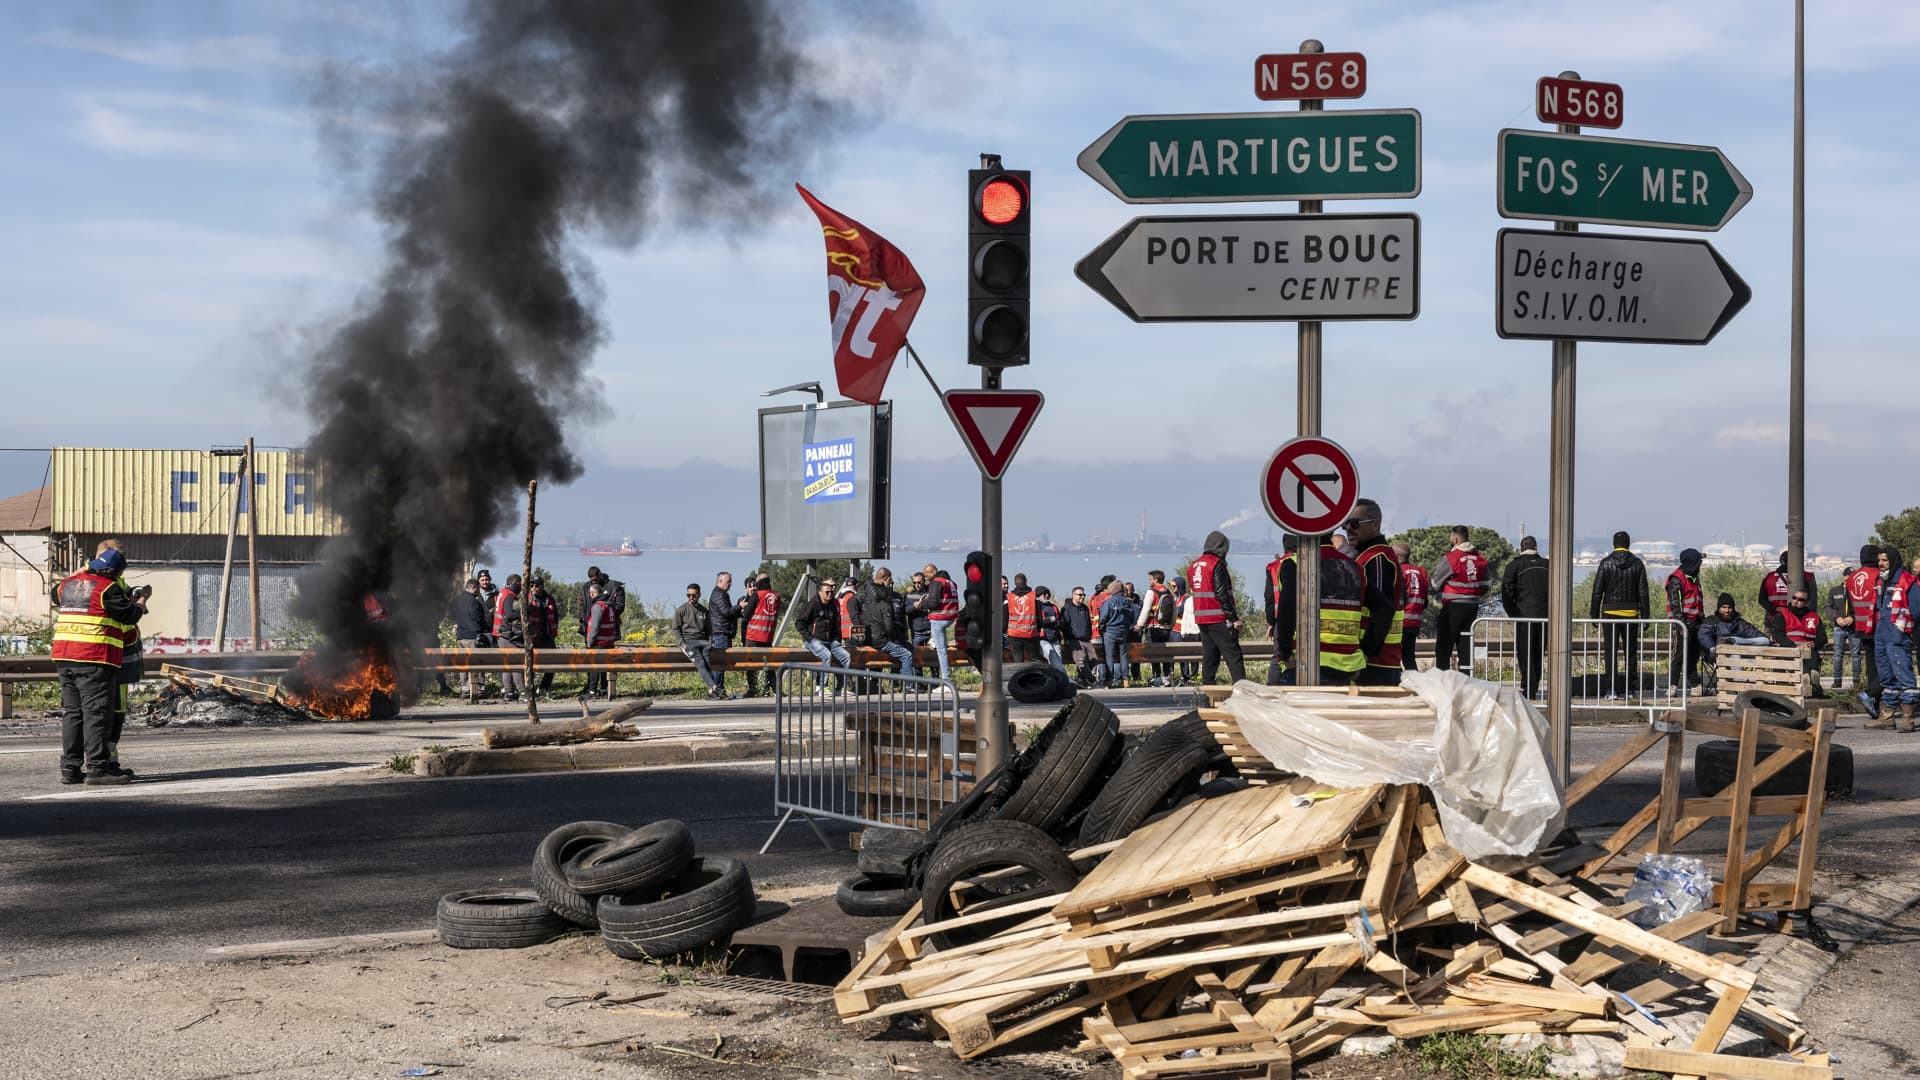 Striking members of the General Confederation of Labour (CGT) union set up fires and blockades en route to the industrial and port area of Fos-sur-Mer, France, on Wednesday, March 22, 2023. France released strategic stockpiles of oil products this month as the latest round of strike action over pension reforms hobbles the nation's fuel distribution network.